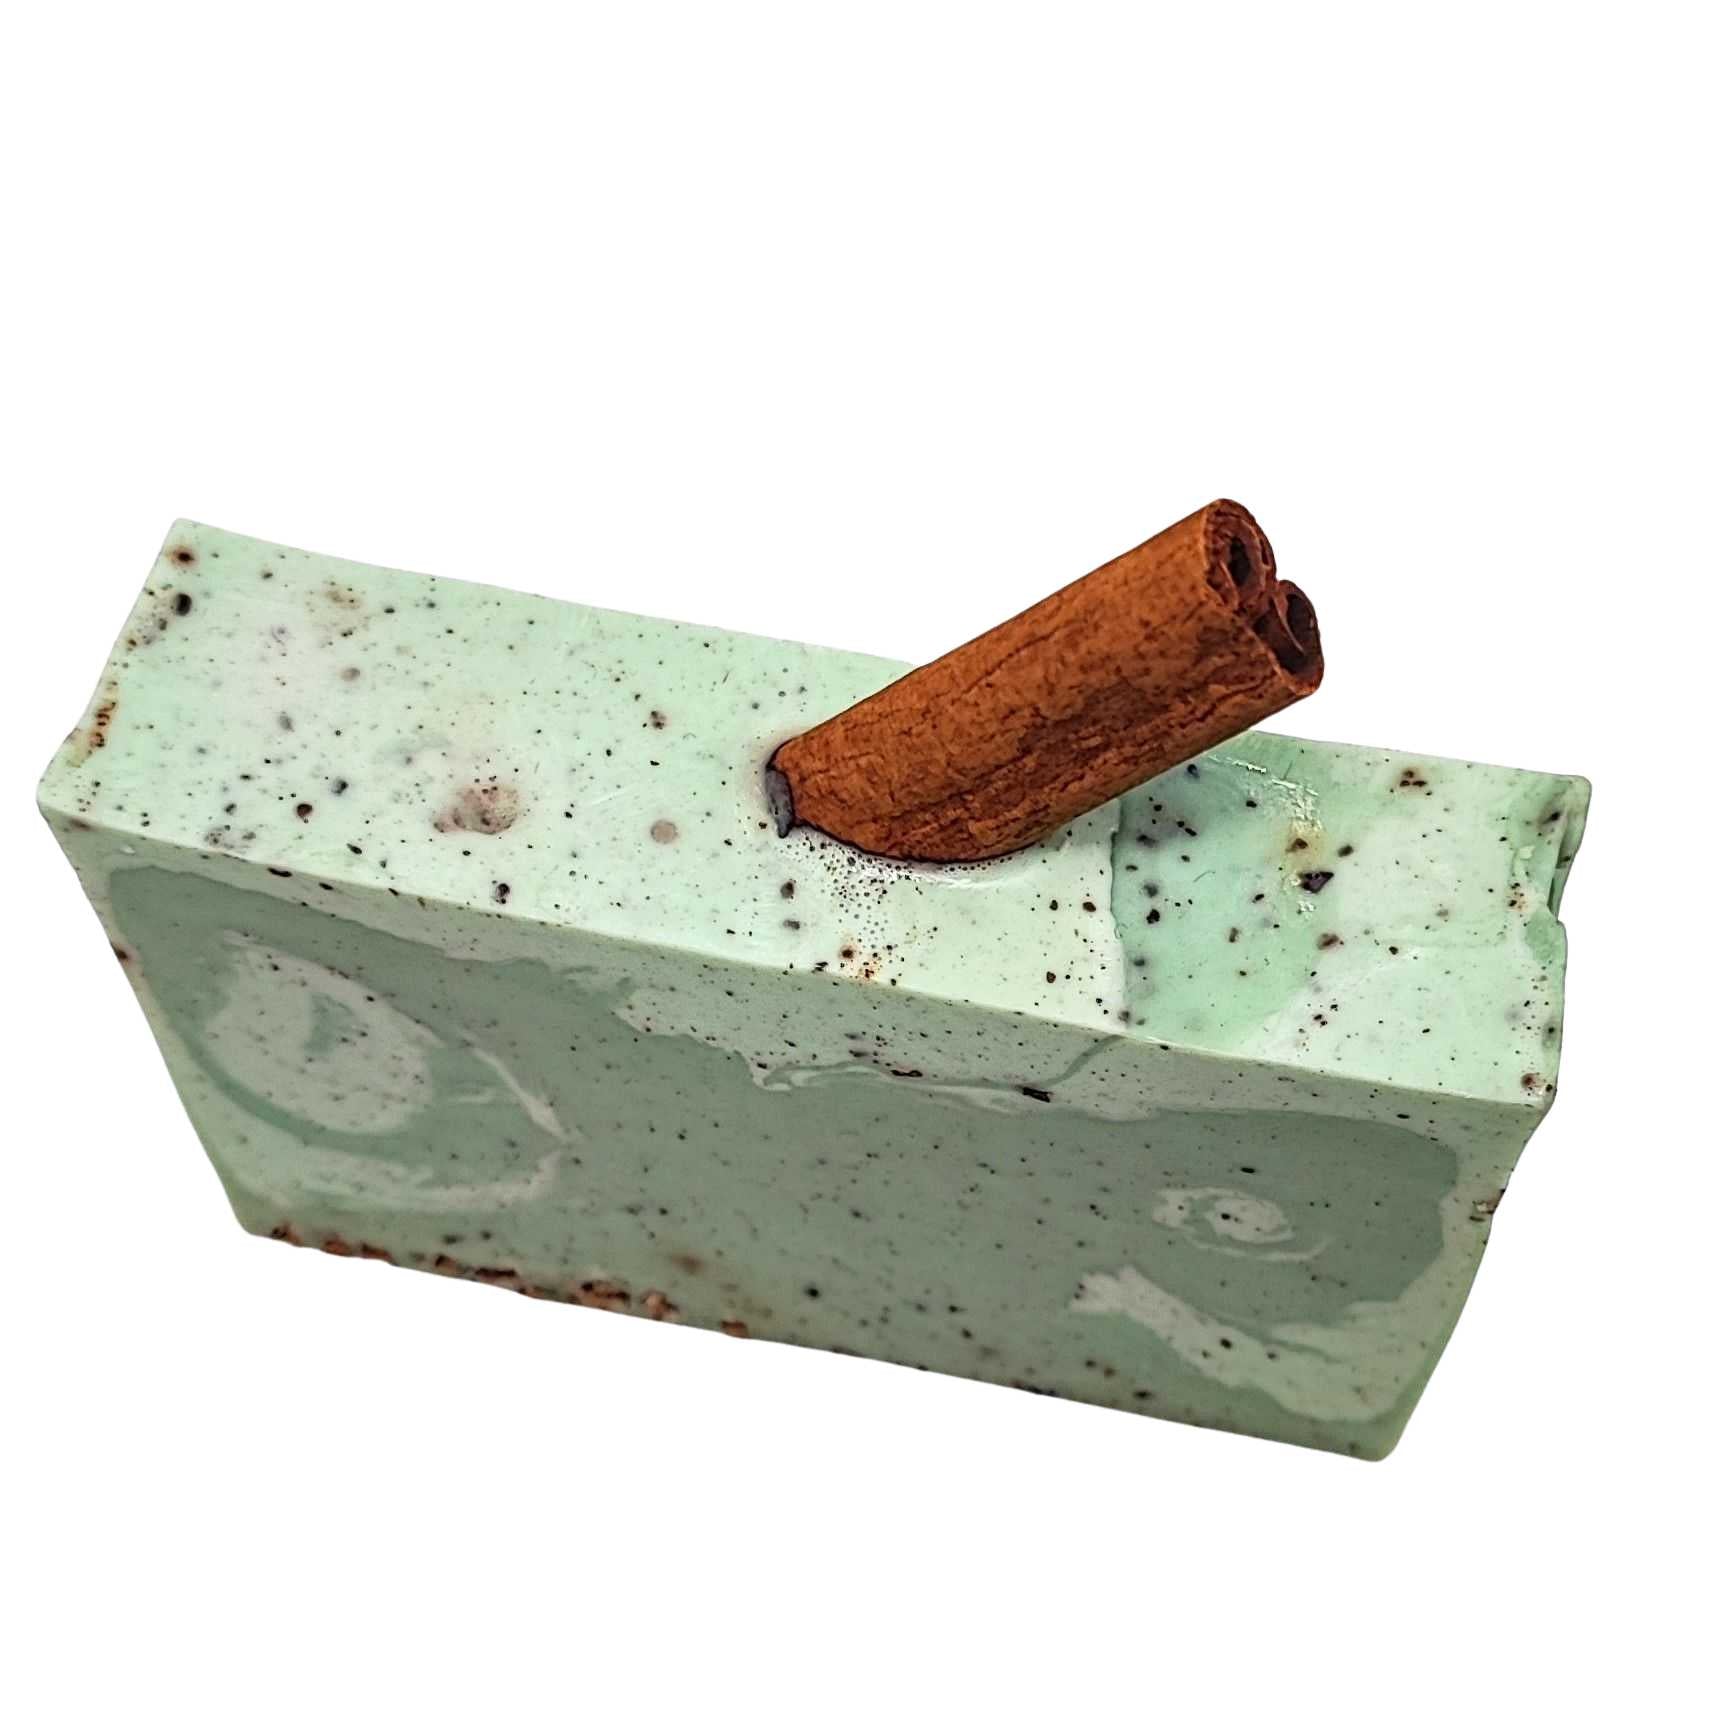 Soap Bar -Apple & Cinnamon -4oz -Fruity & Spicy Scent -Aromes Evasions 